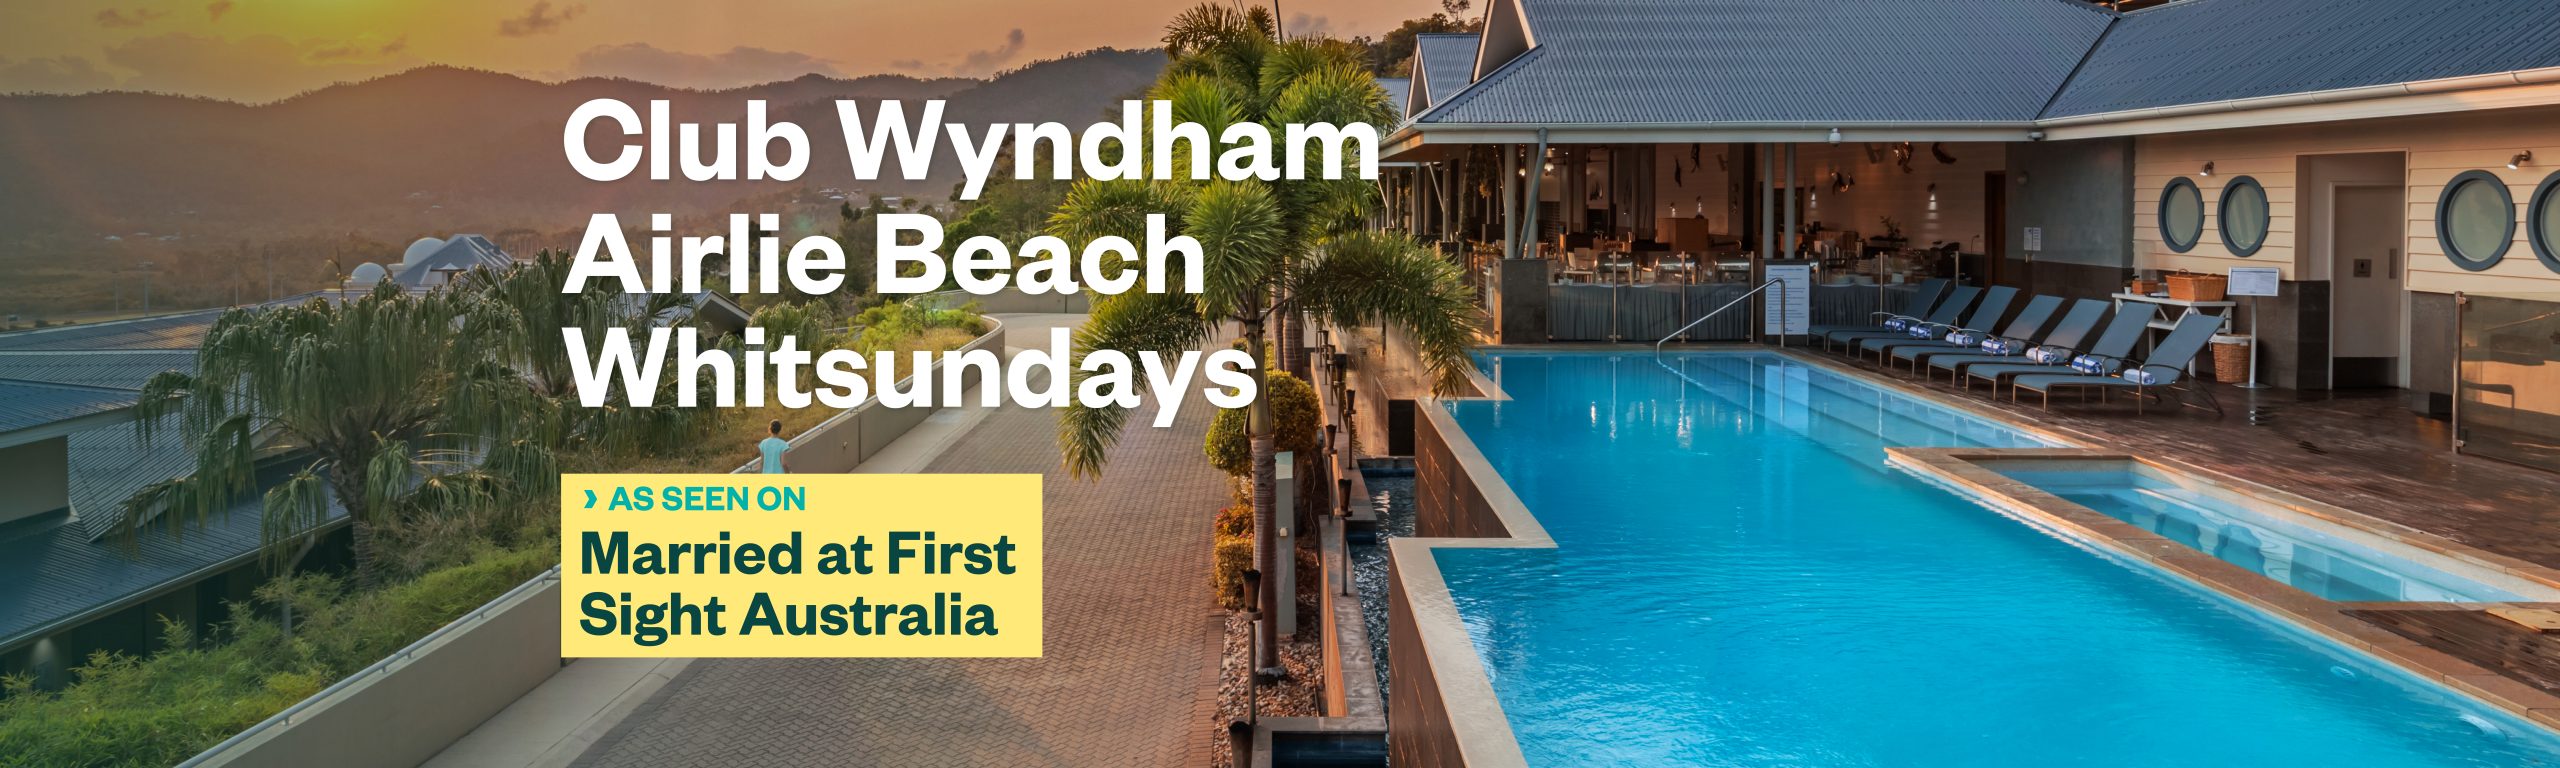 Married at first sight at Club Wyndham Airlie Beach